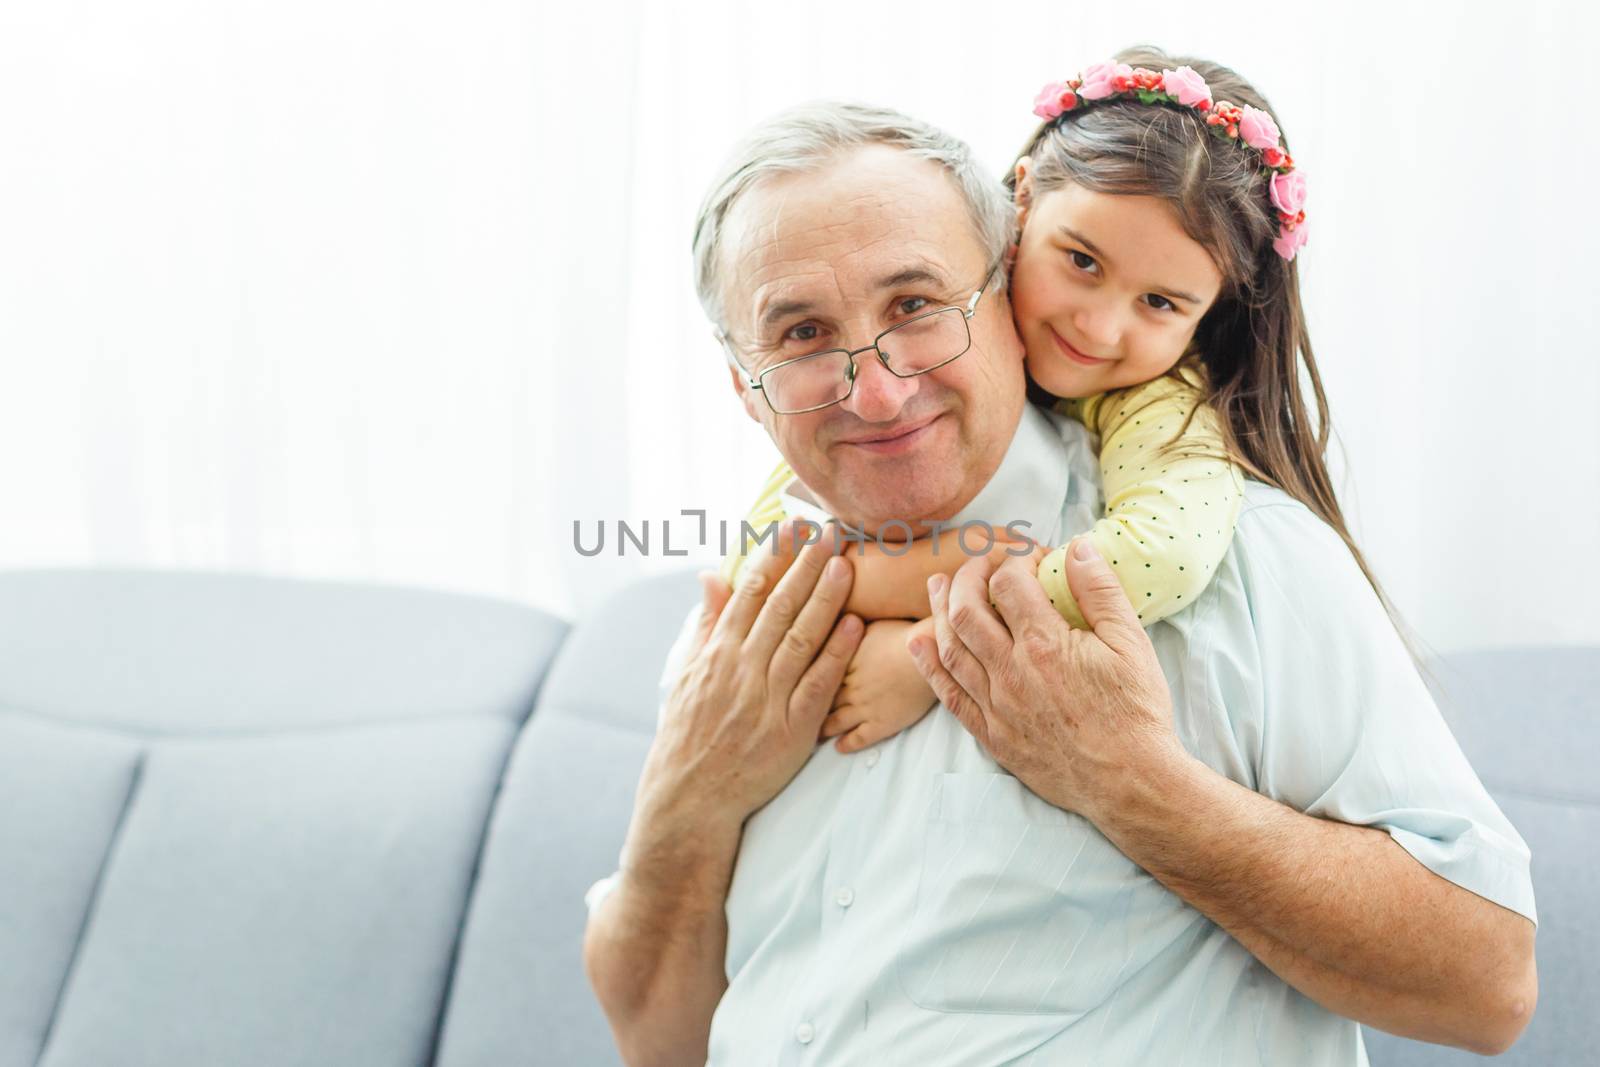 The happy girl hugs a grandfather on the sofa by Andelov13